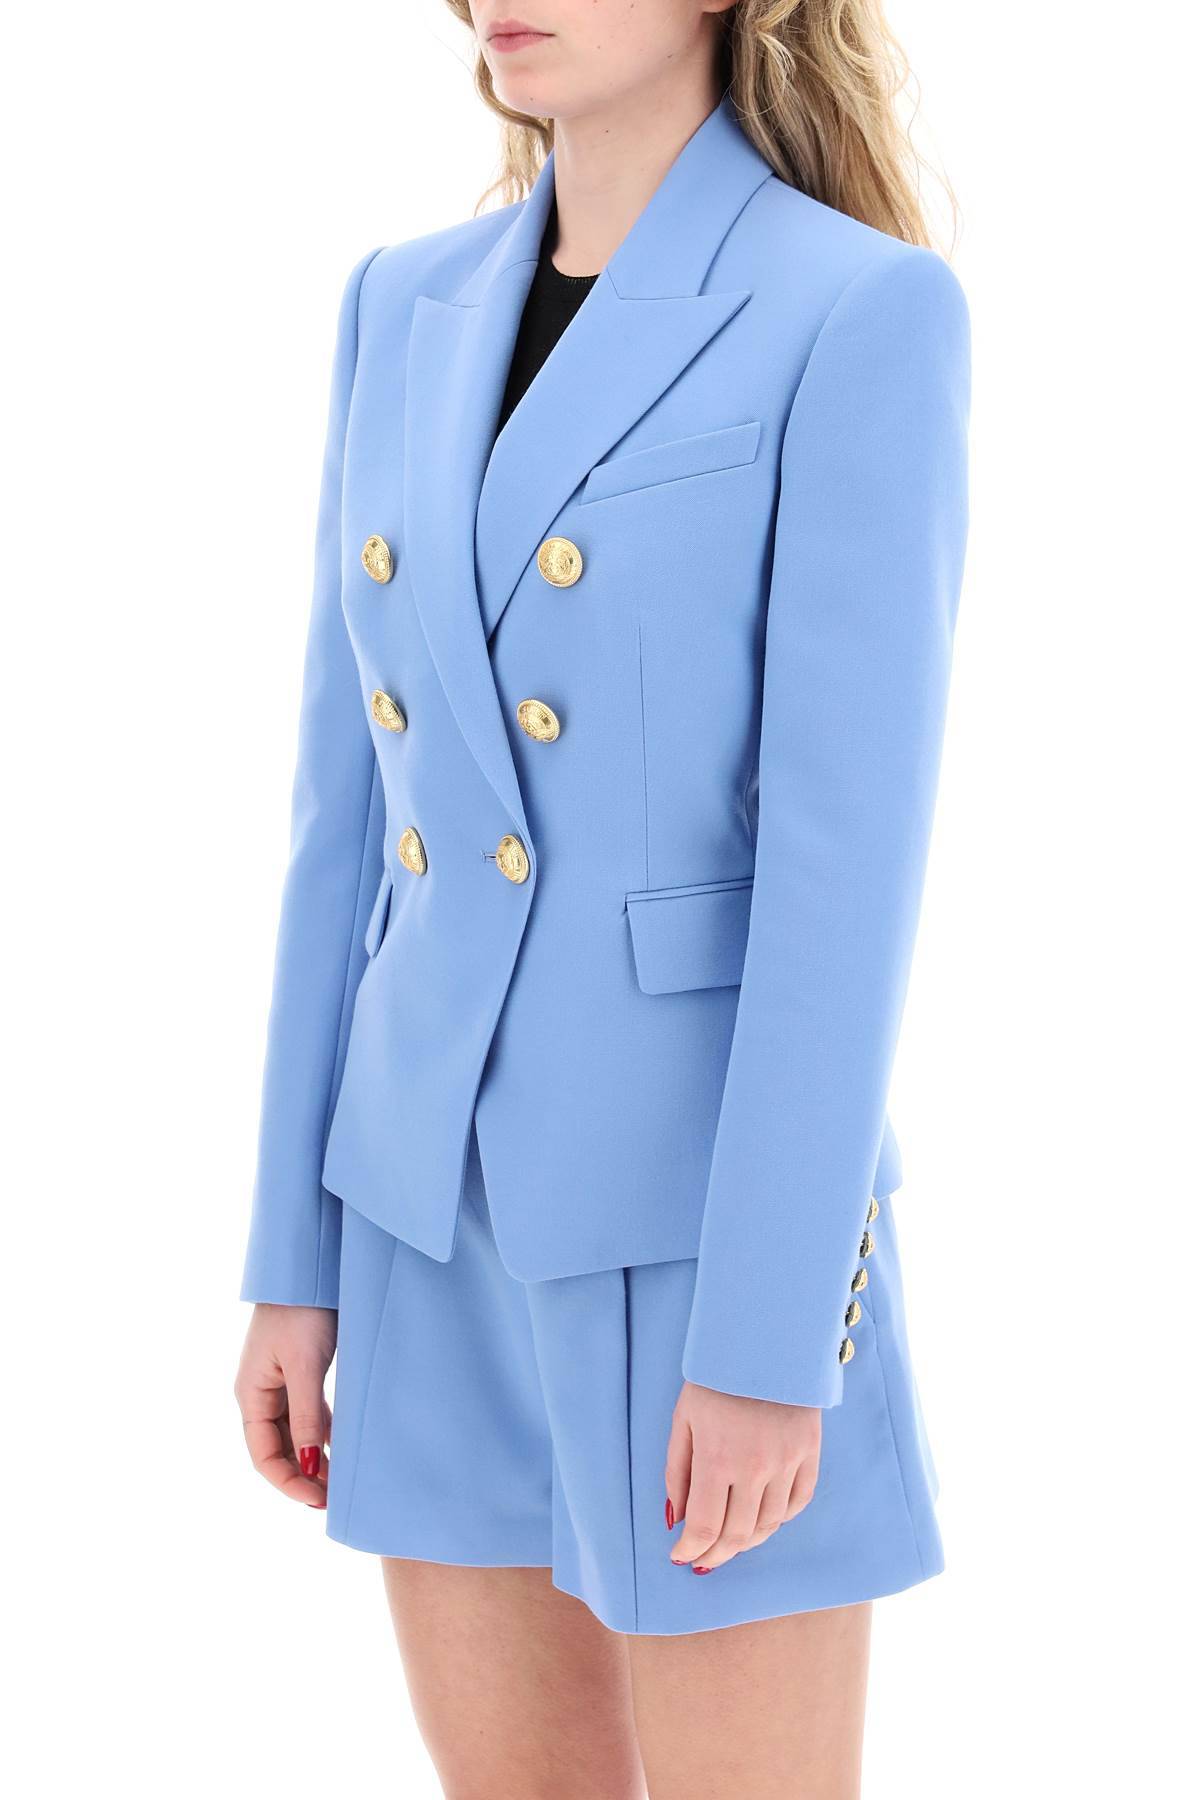 Shop Balmain Fitted Double-breasted Jacket In Light Blue